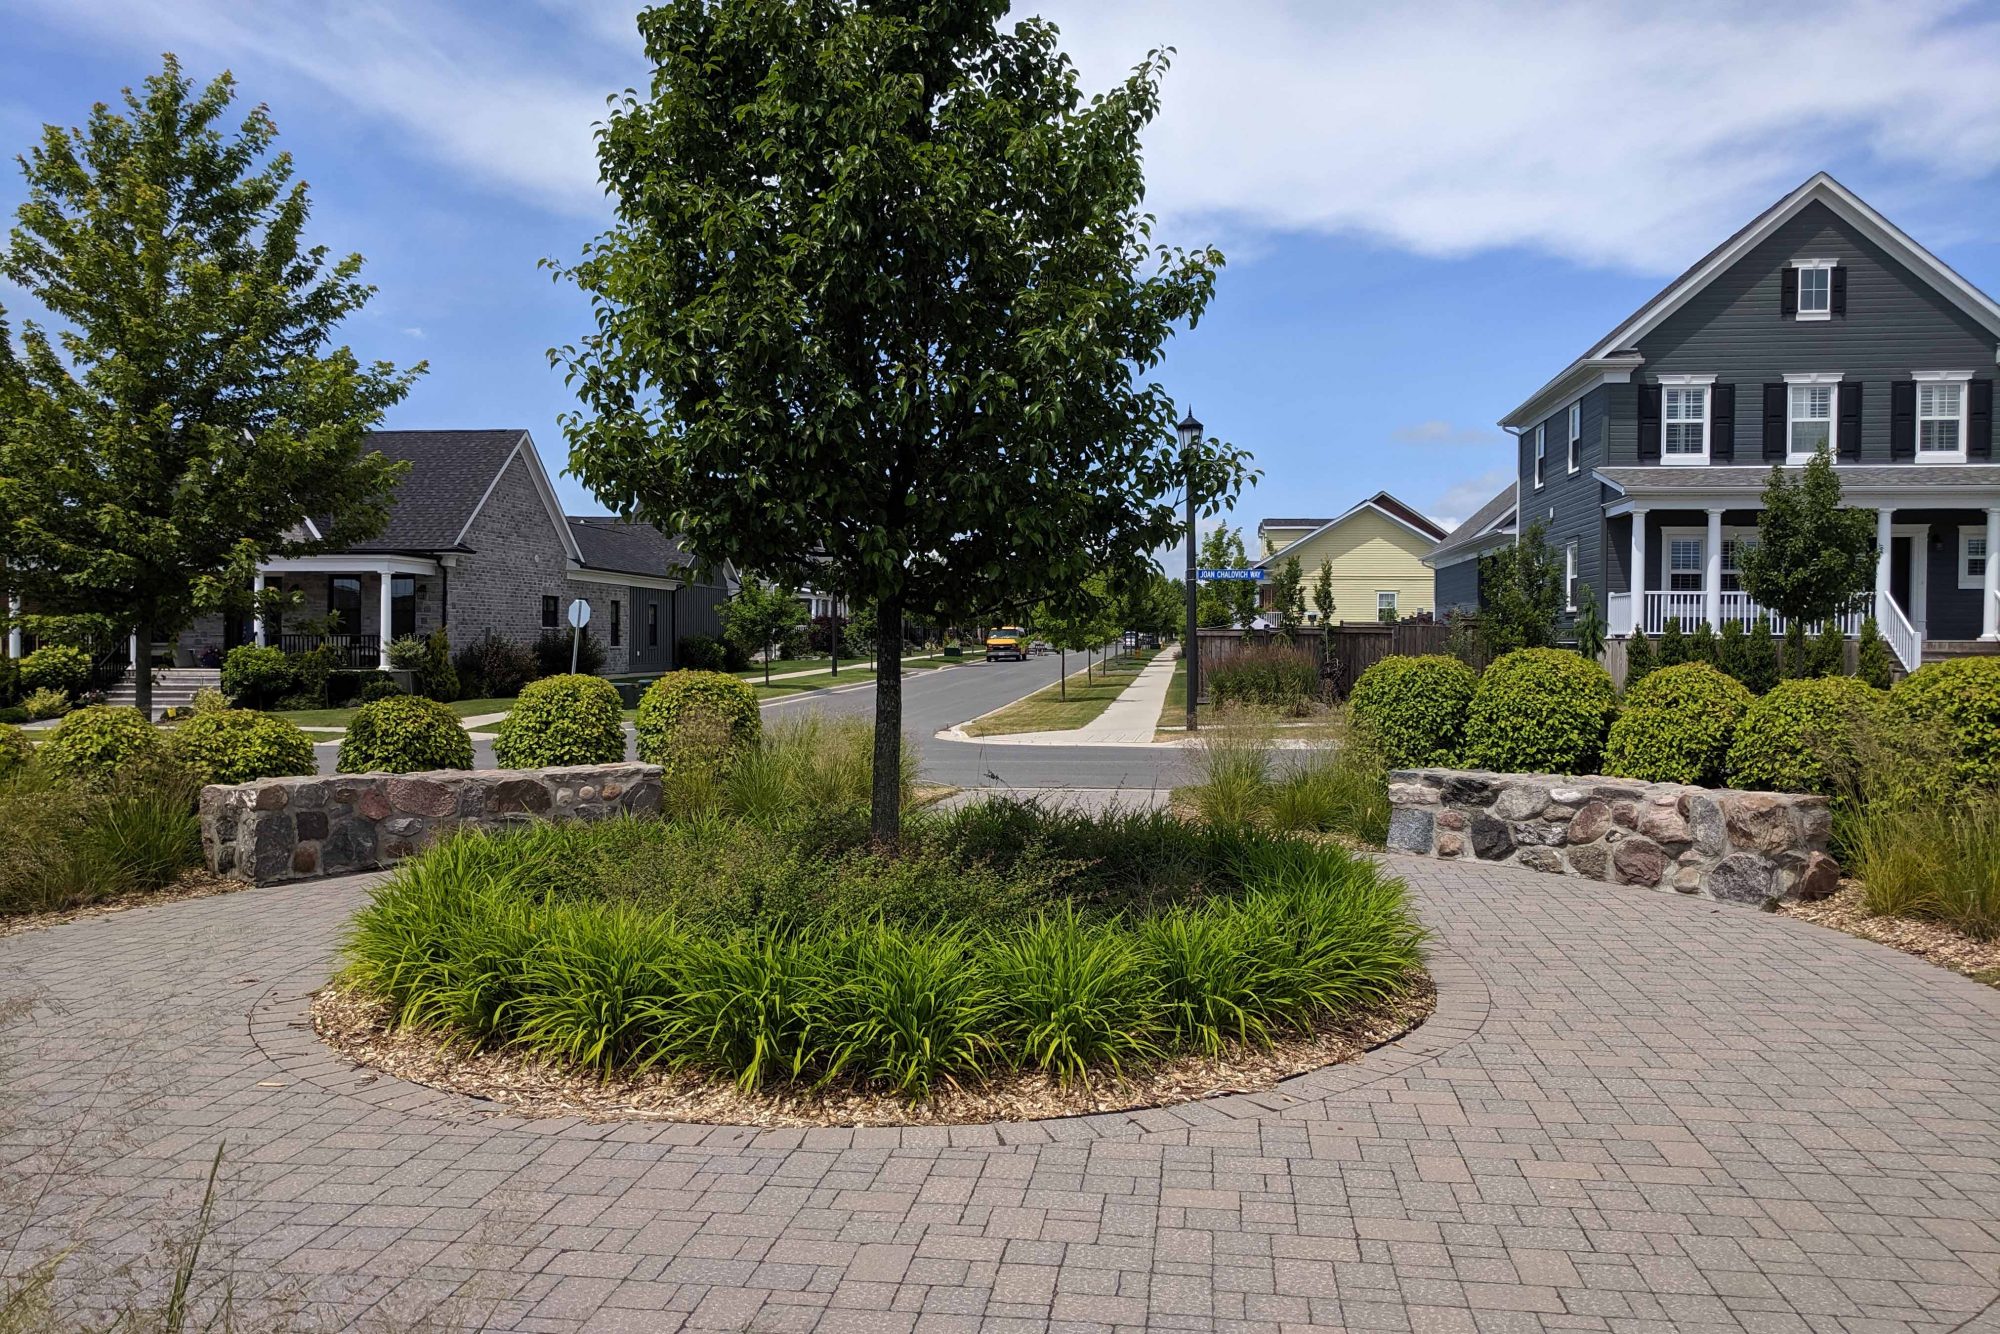 Circular paved path with a tree and shrubs in the centre and across from a housing subdivision.